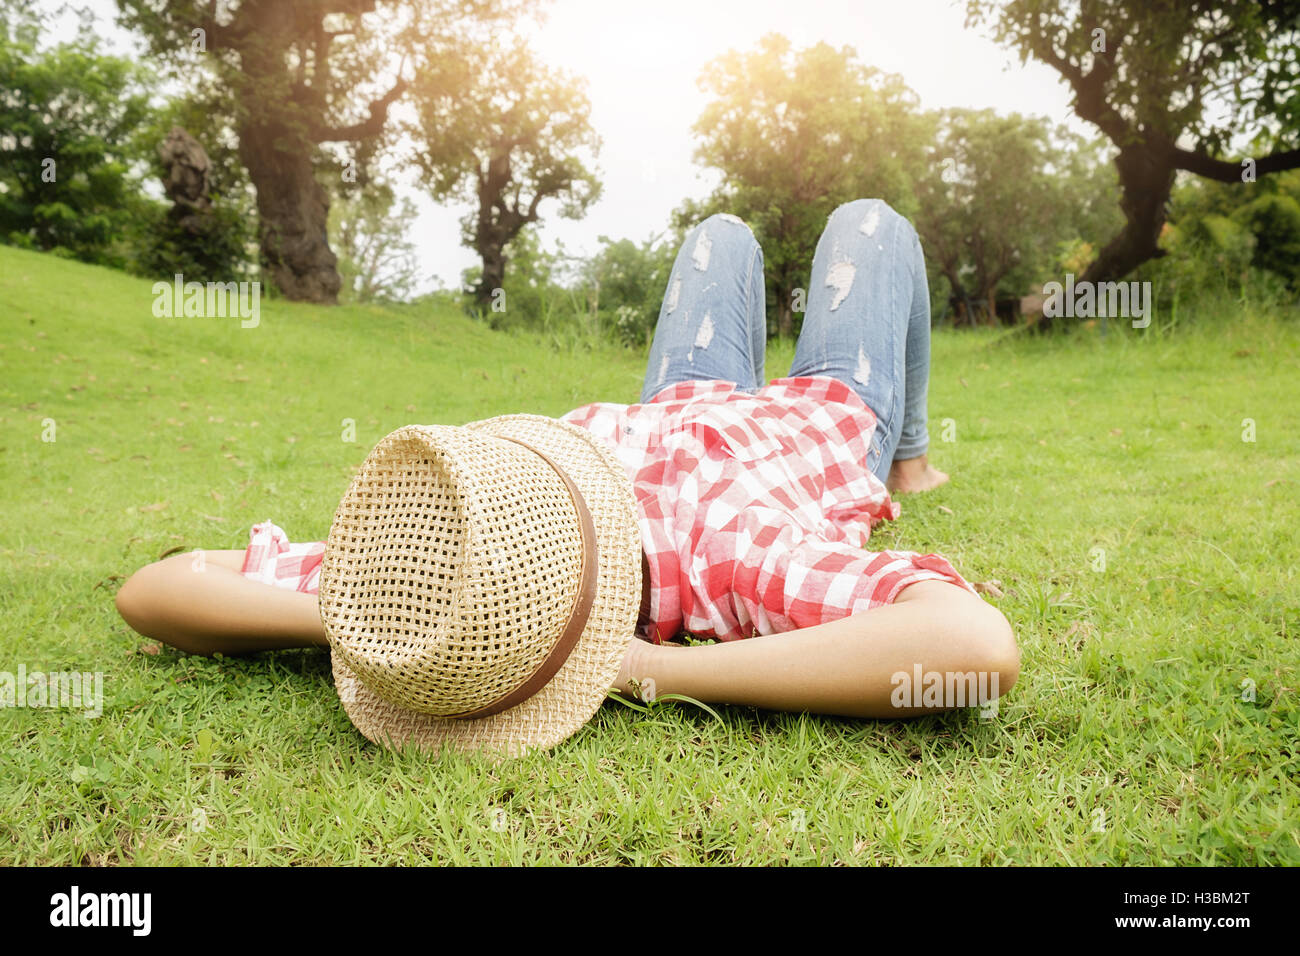 relax,freedom,girl, grass, green, happiness,lifestyle,outdoor, park,hipster Stock Photo